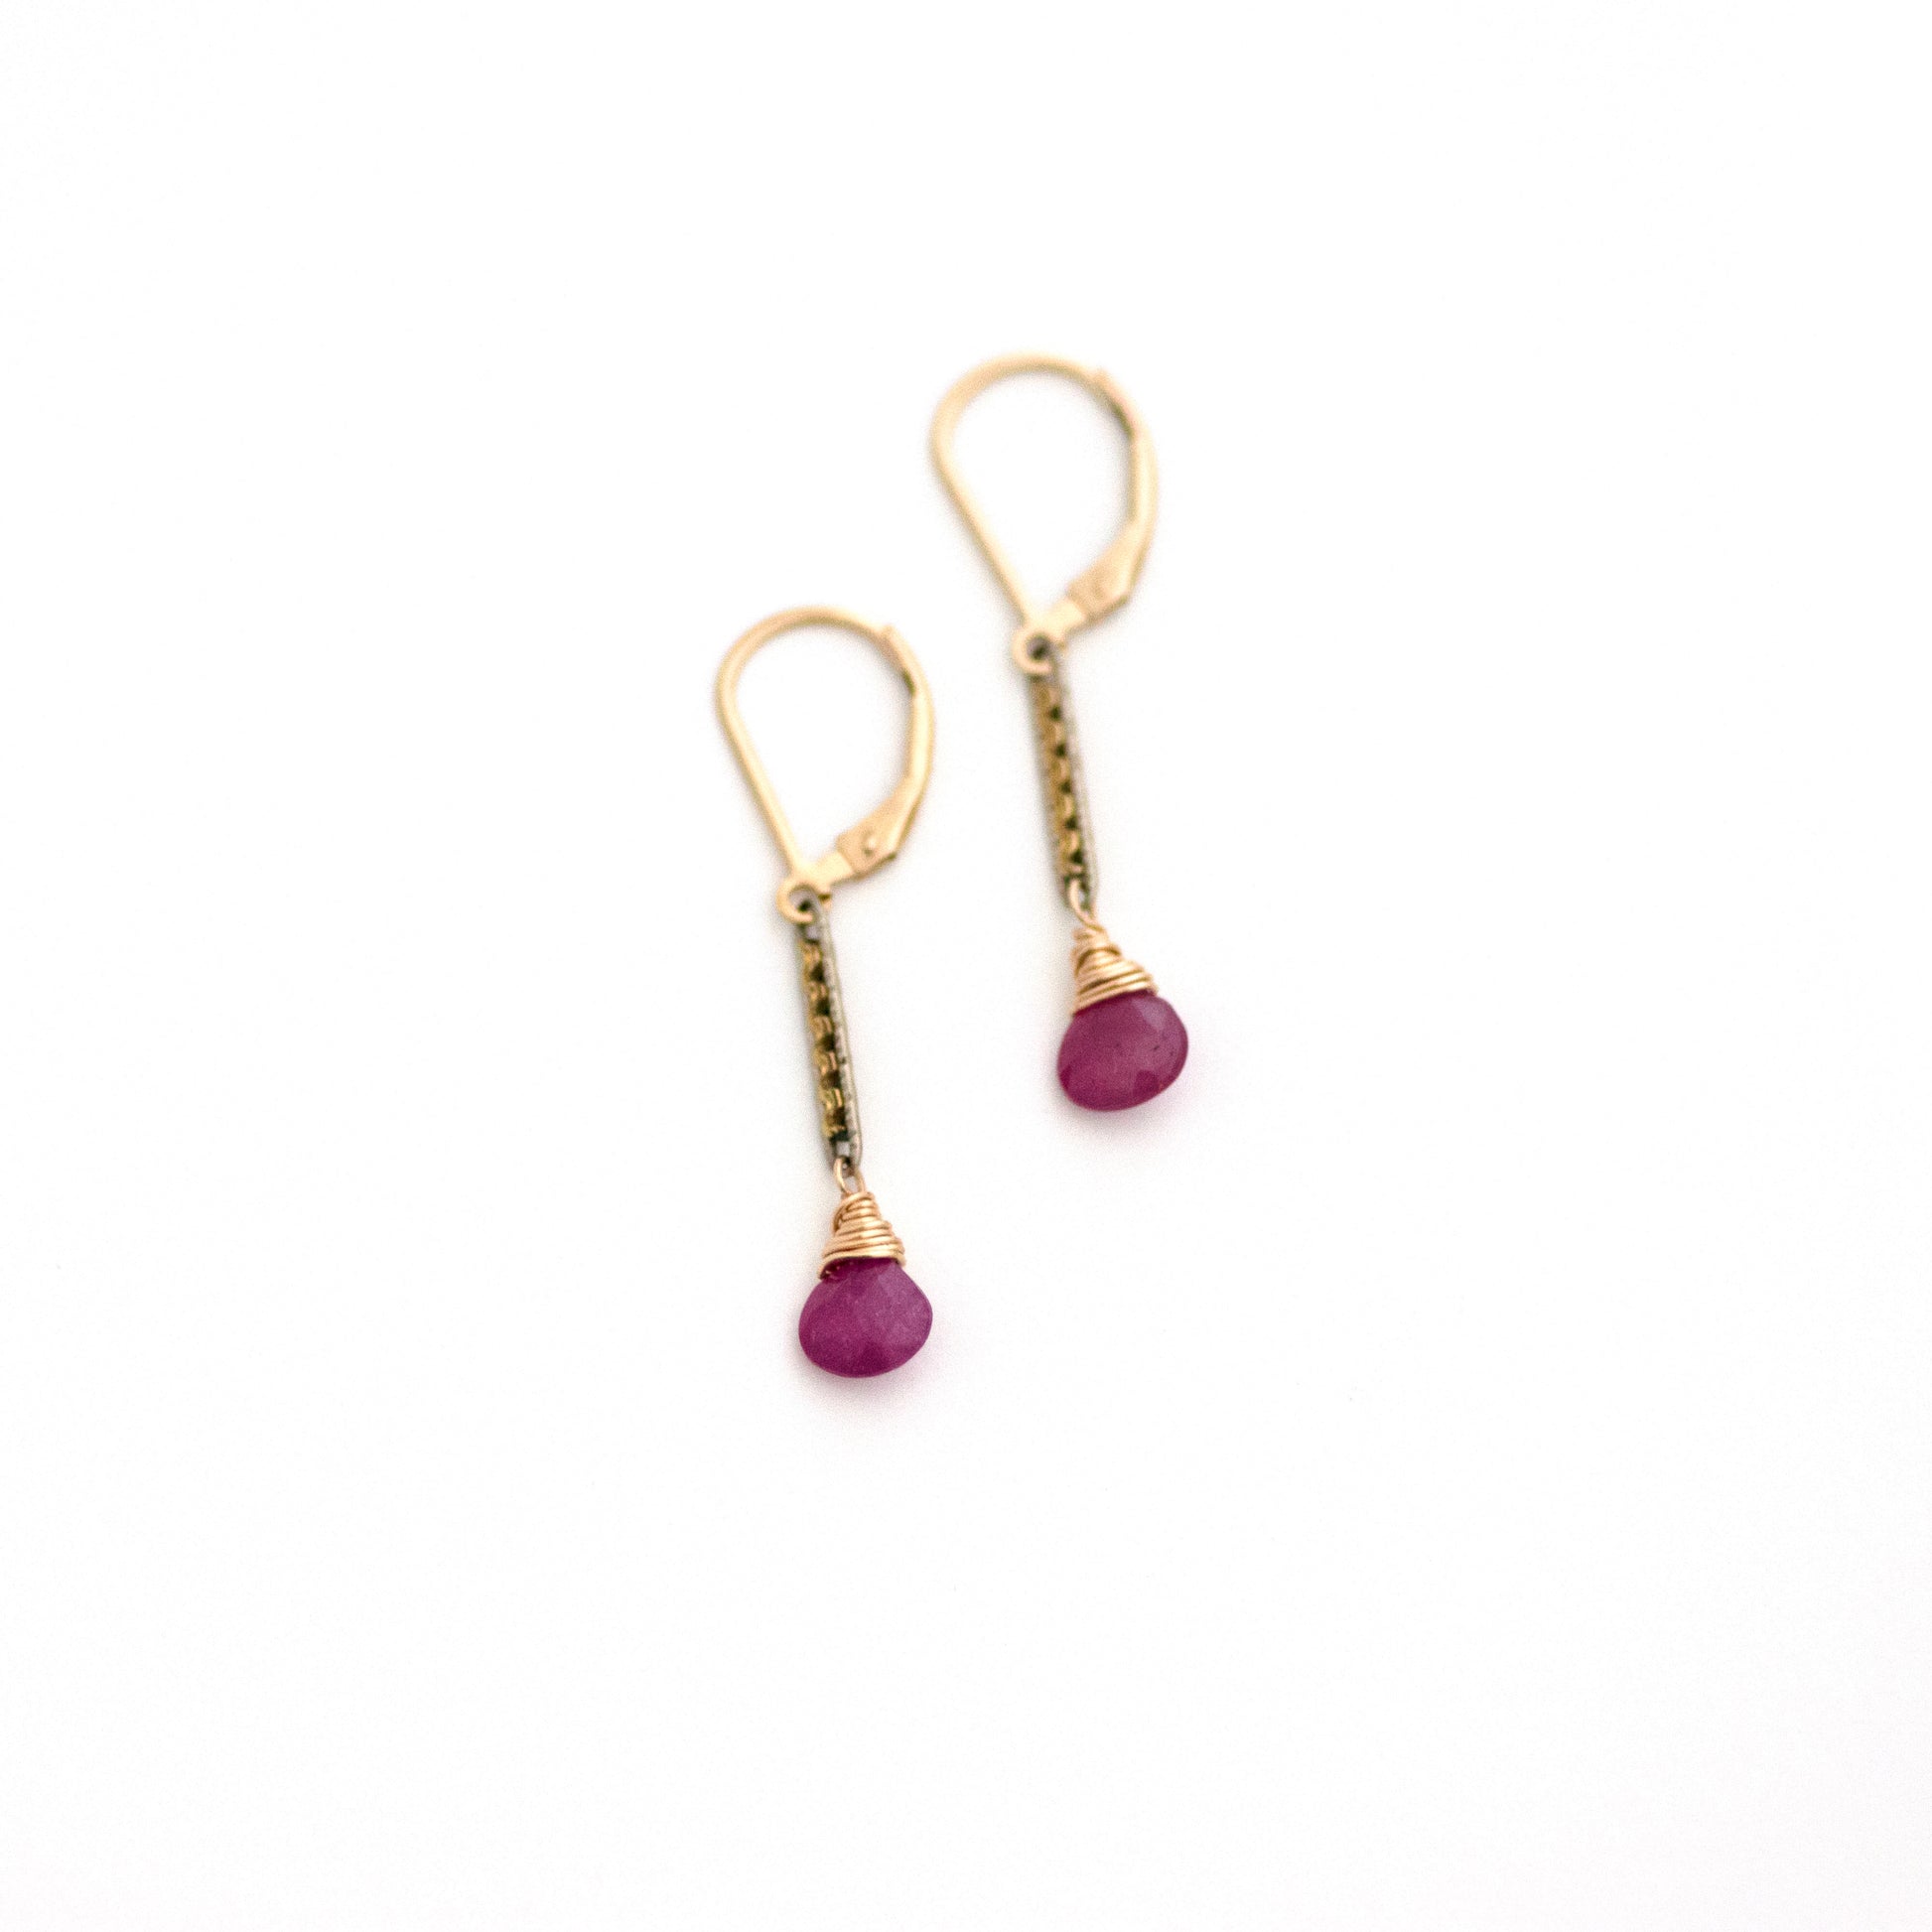 These antique conversion earrings are made up of:  Gold filled and silver tone Edwardian watch chain links from the early 1900s with hand tooled details. Ruby.